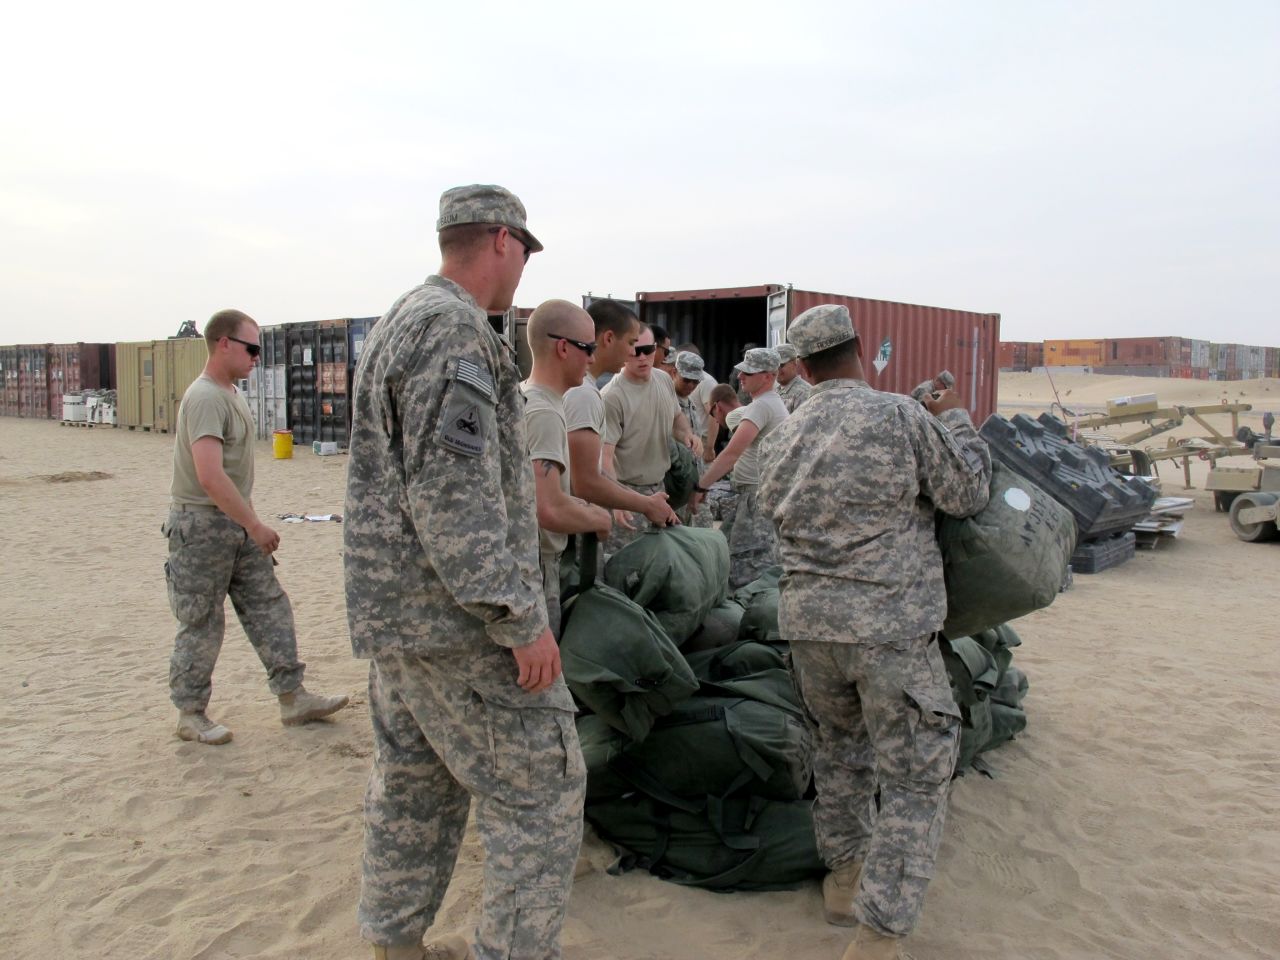 Soldiers load their duffle bags onto a shipping container in Kuwait. The road home for most troops requires them to cross from Iraq into Kuwait, where they turn in equipment before starting the journey back to the United States.